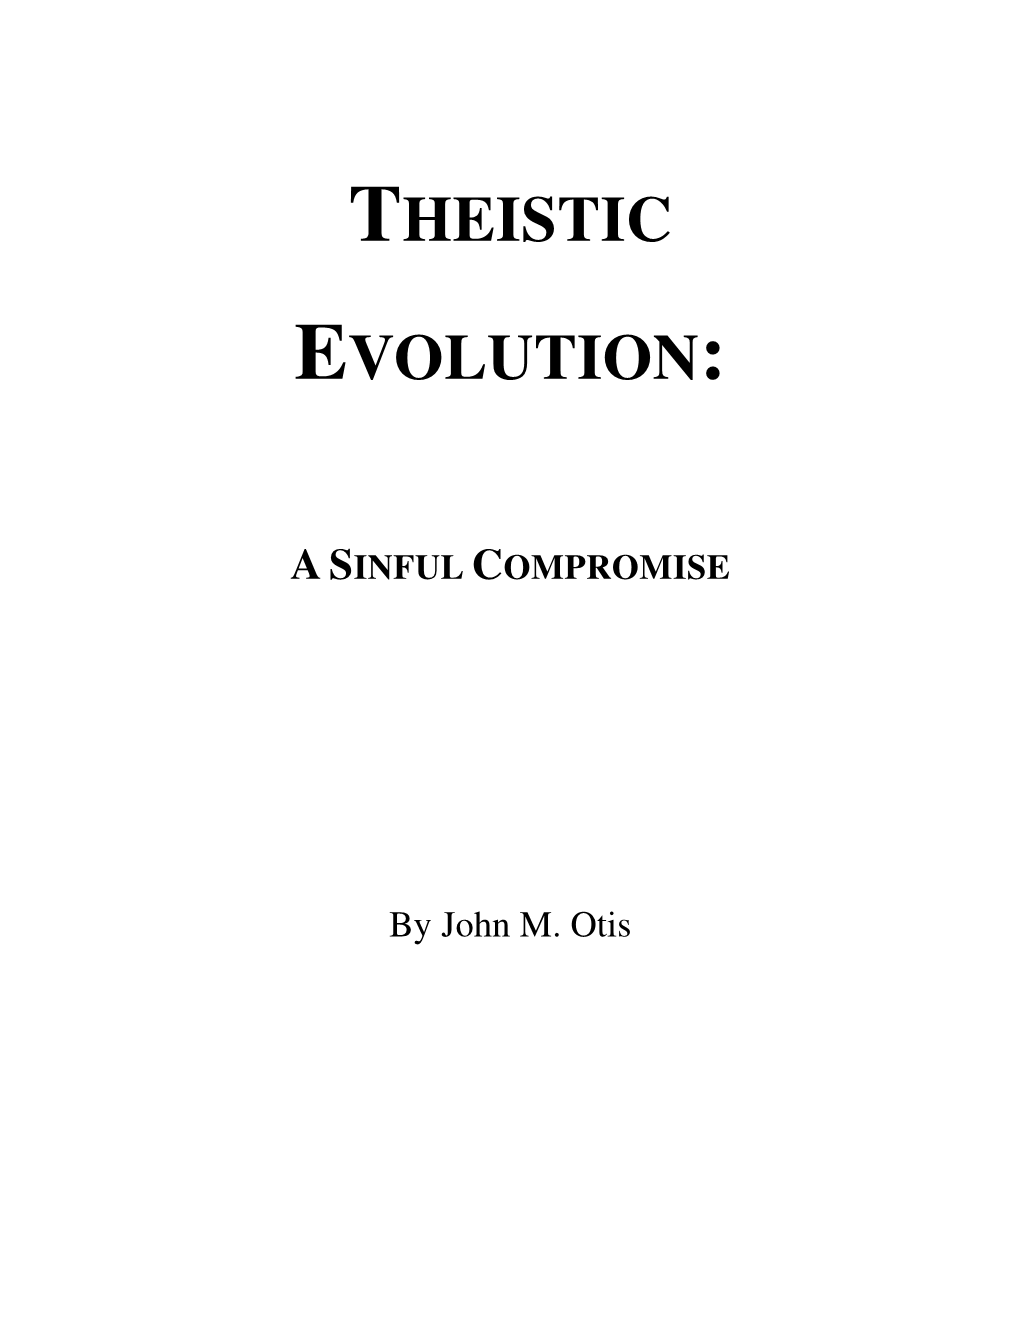 Theistic Evolution: a Sinful Compromise